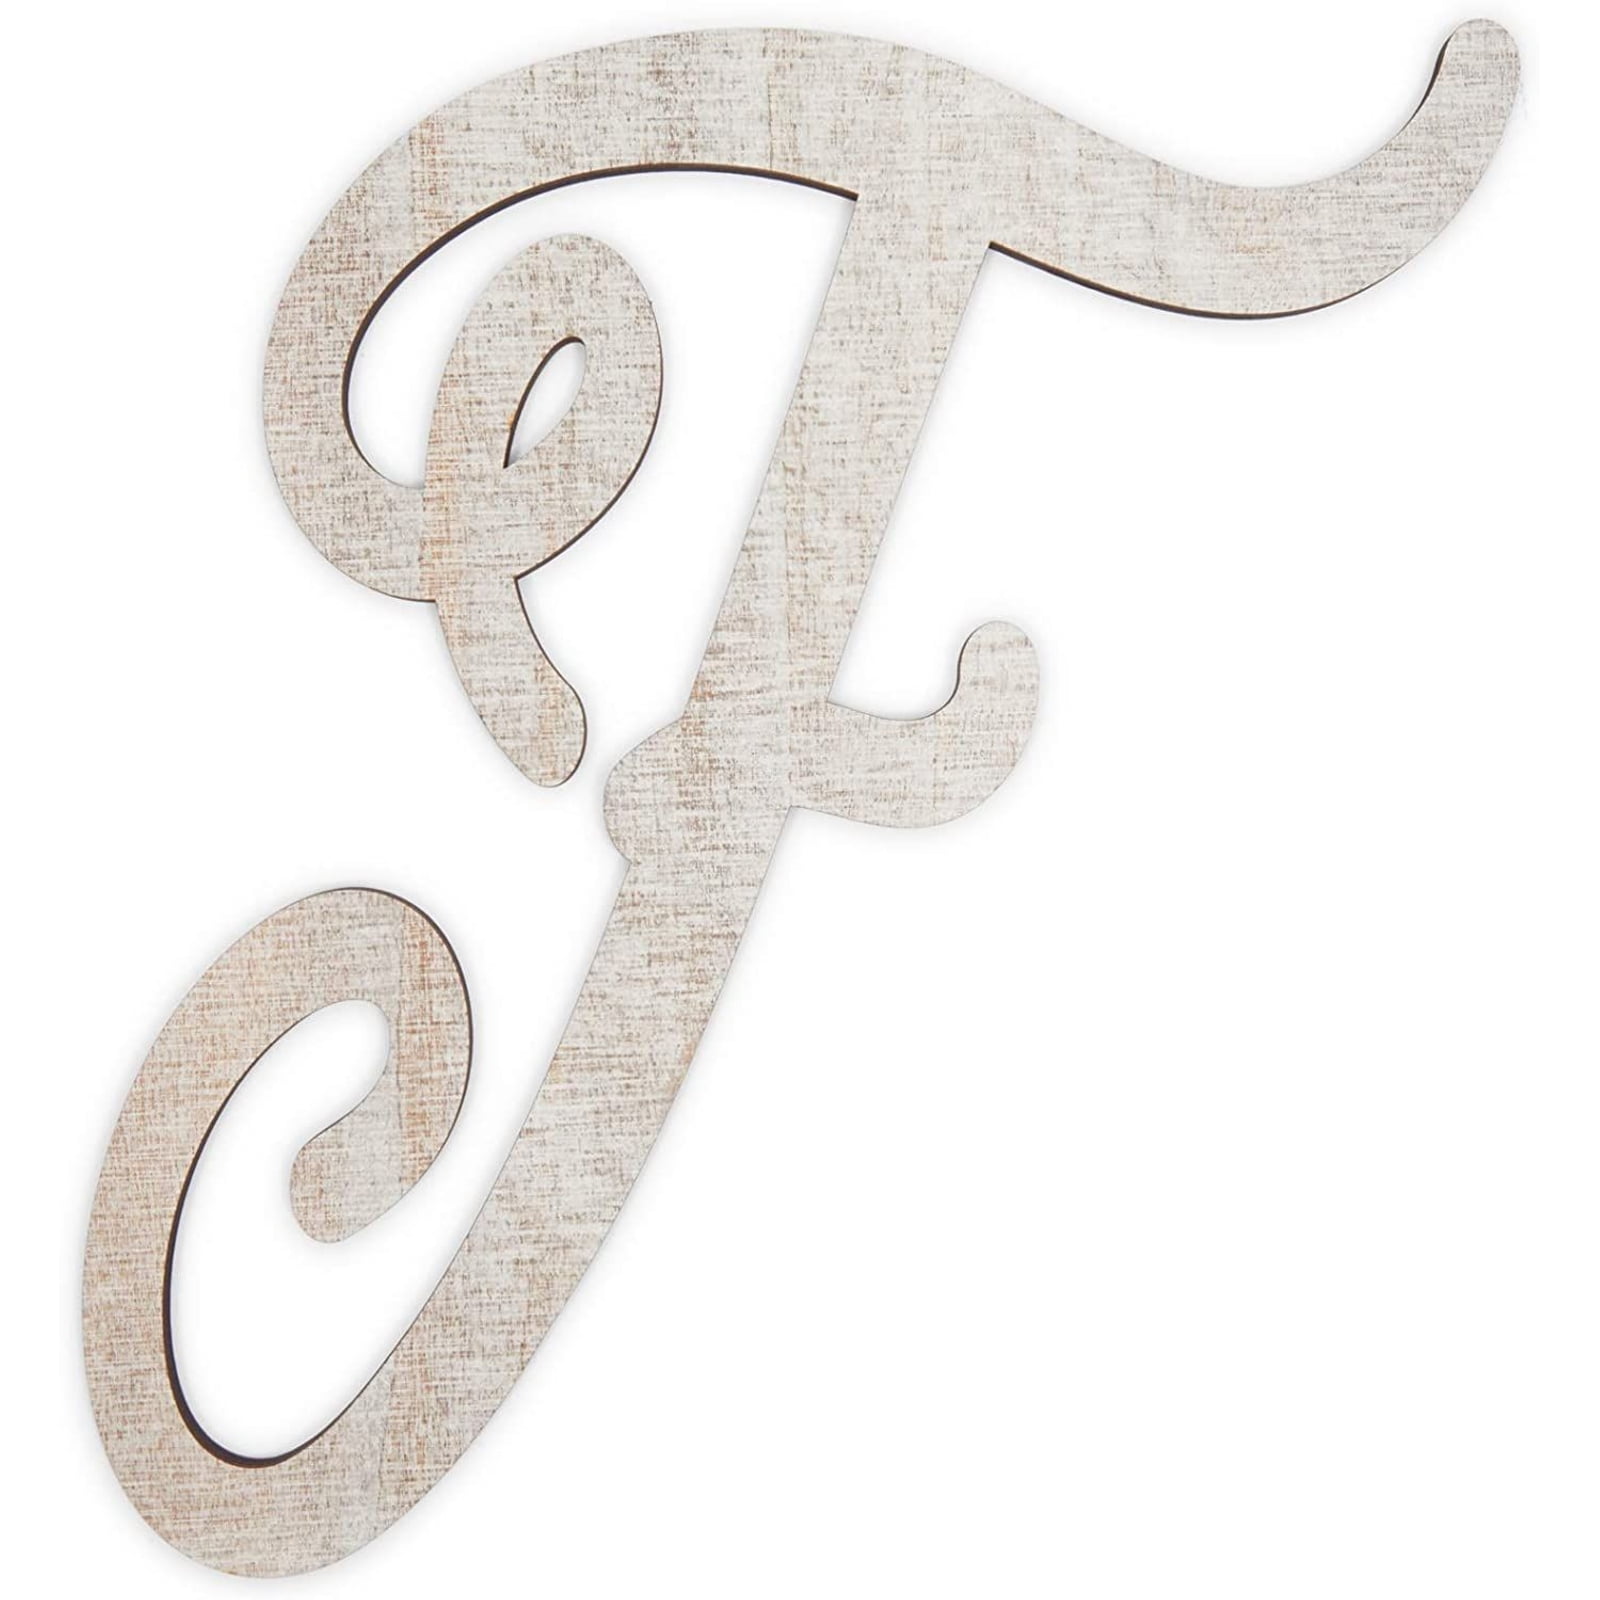 Cursive Wooden Letters F for Wall Decor 14 inch Large Wooden Letters Unfinished Monogram Wood Letter Crafts Alphabet Sign Cutouts for DIY Painting